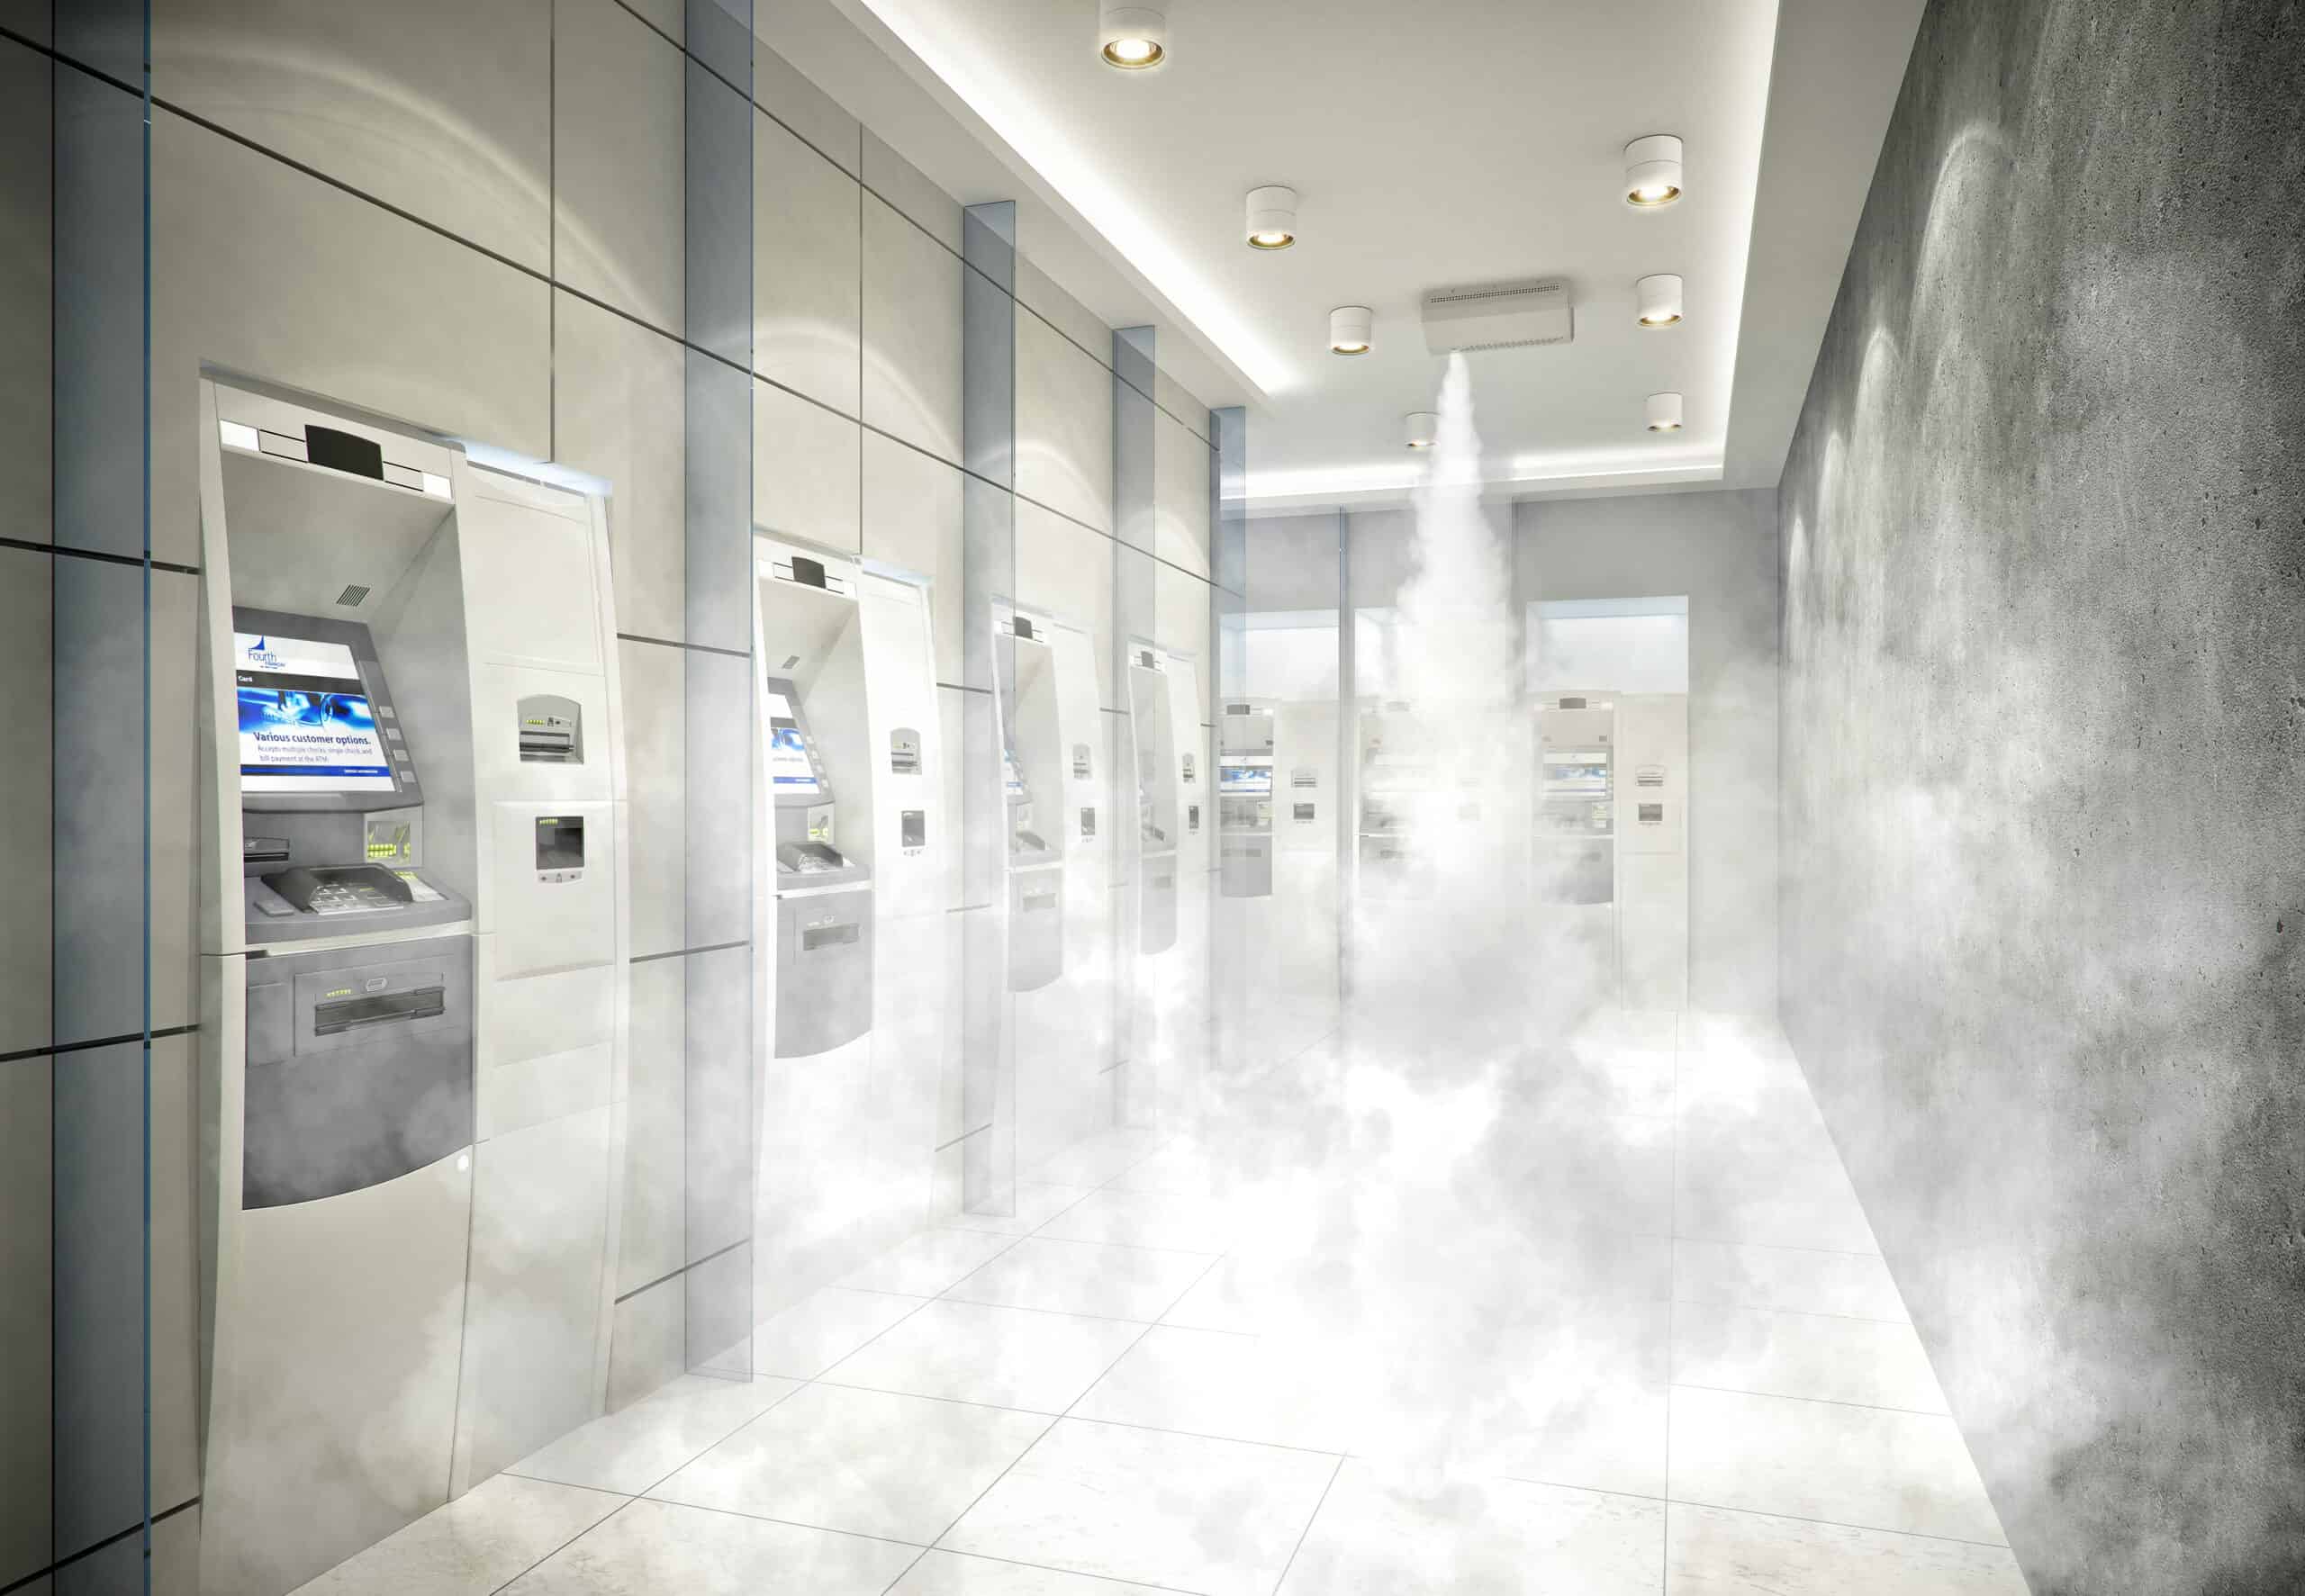 ATM protected by fog cannon